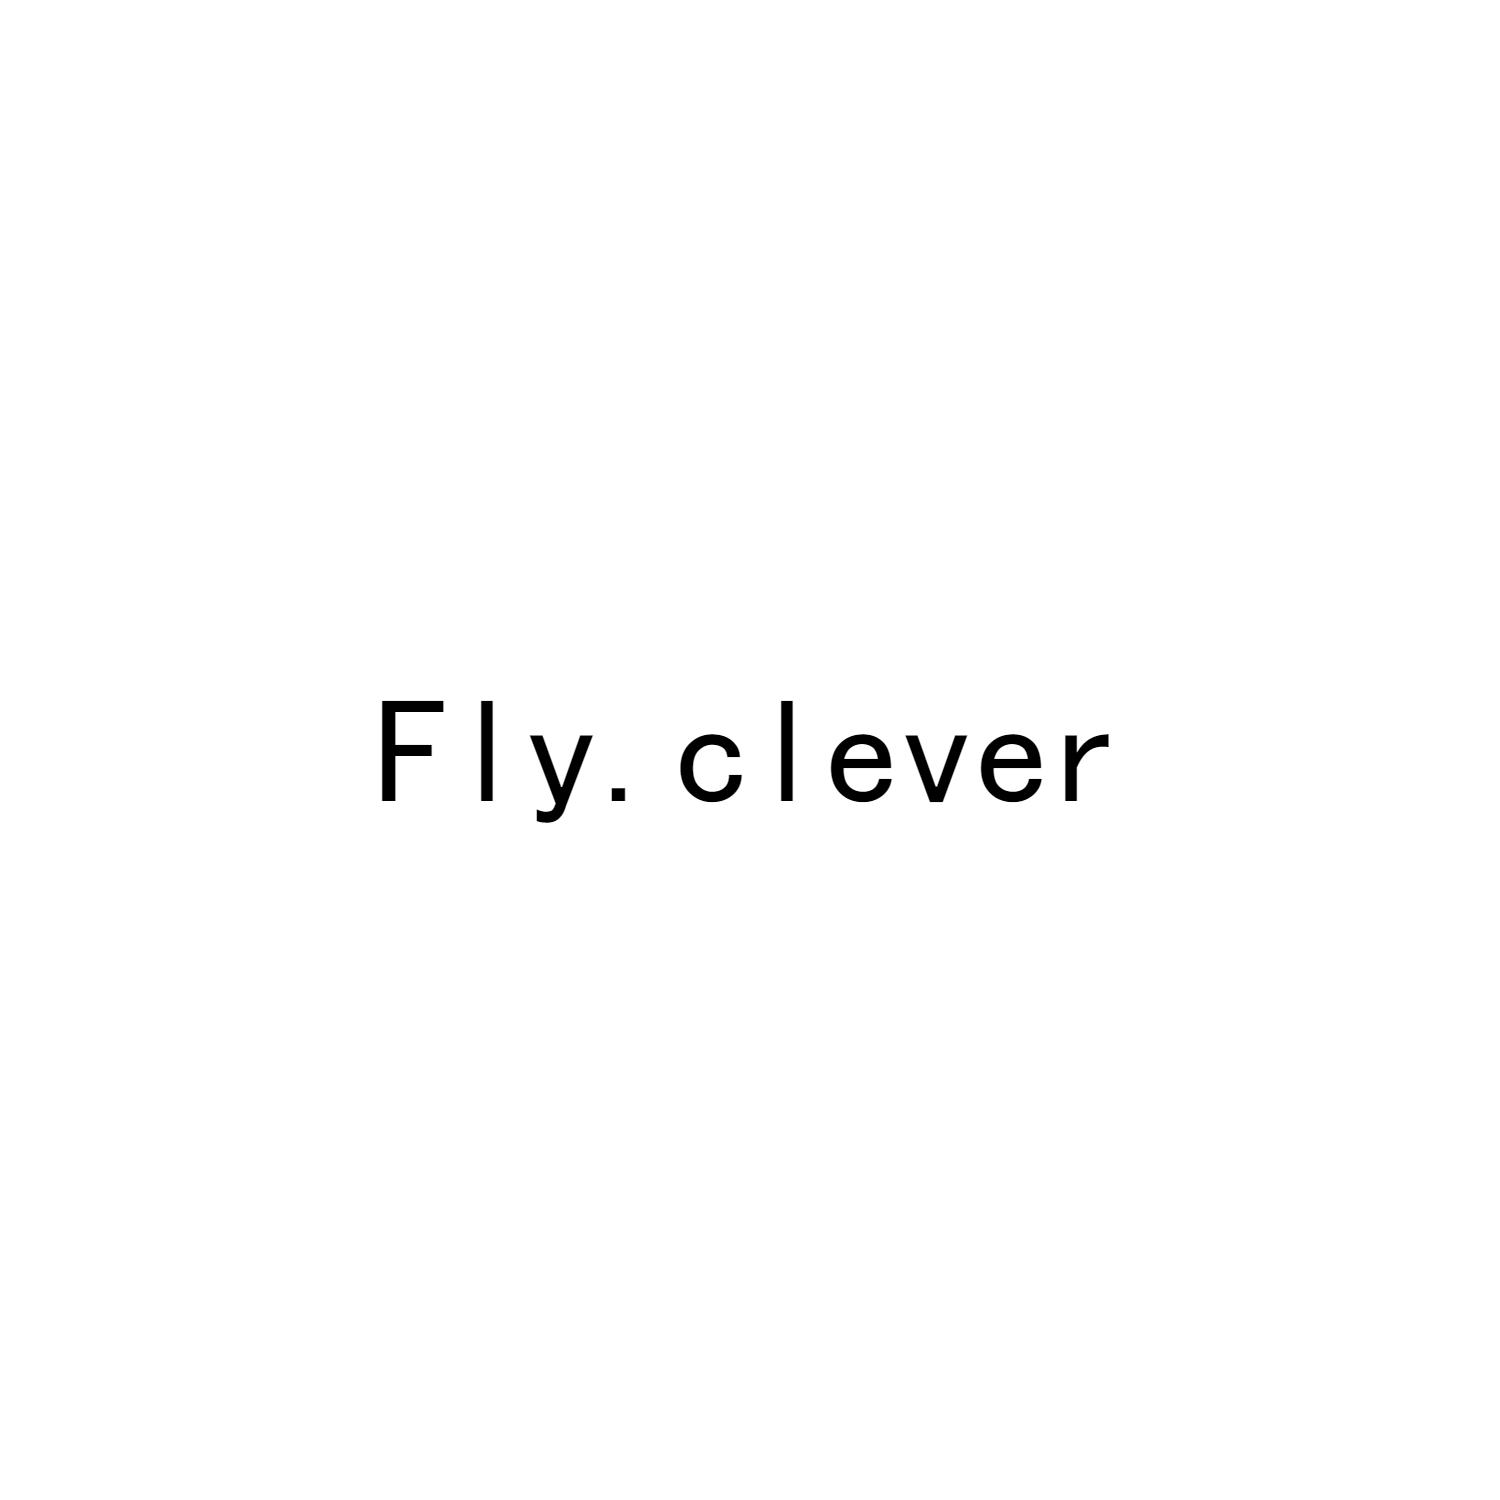 FLY.CLEVER